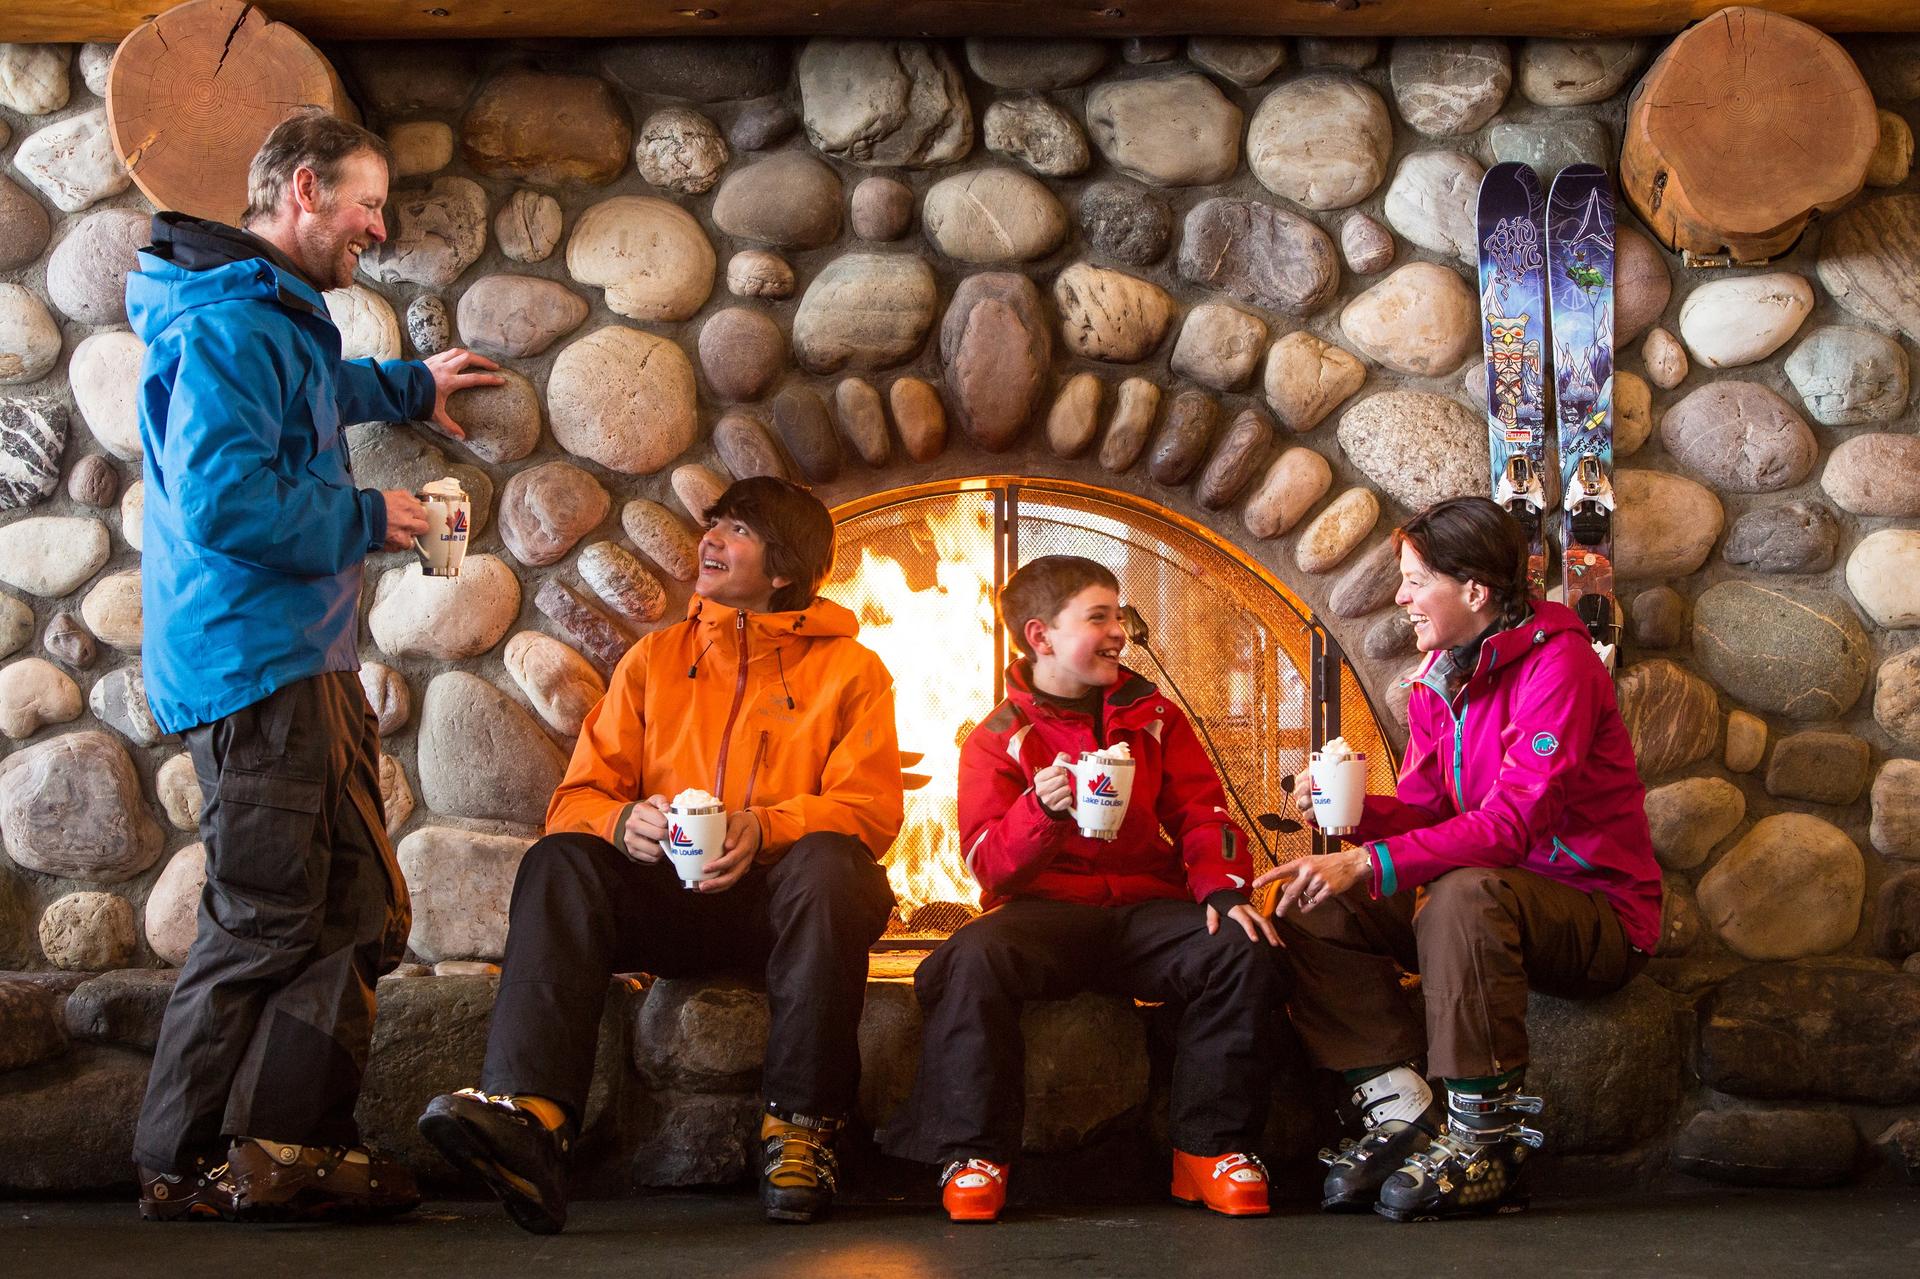 Parents and children enjoy warm drinks by a fireplace after skiing